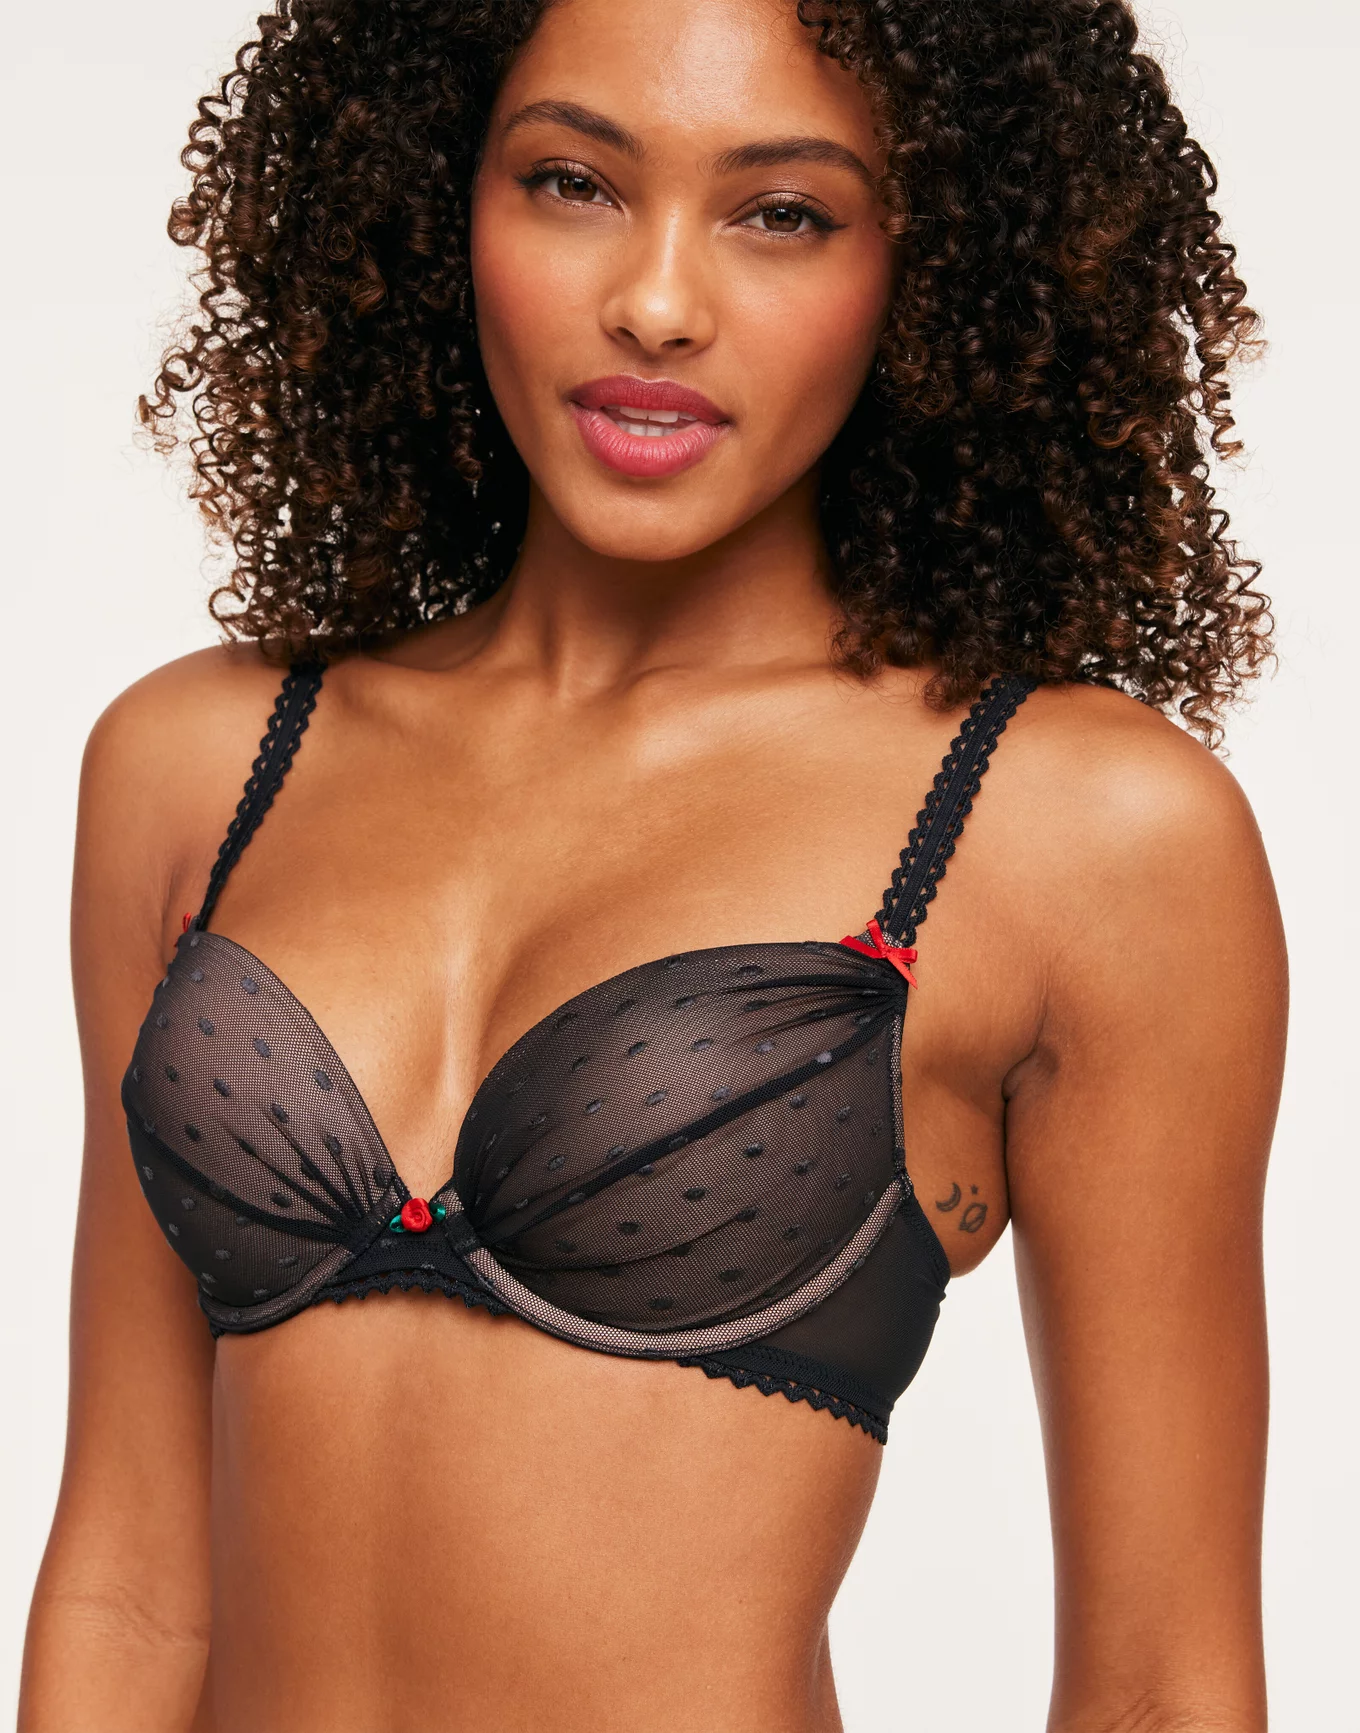 Stacy Black Push up plunge, 32A-38DD